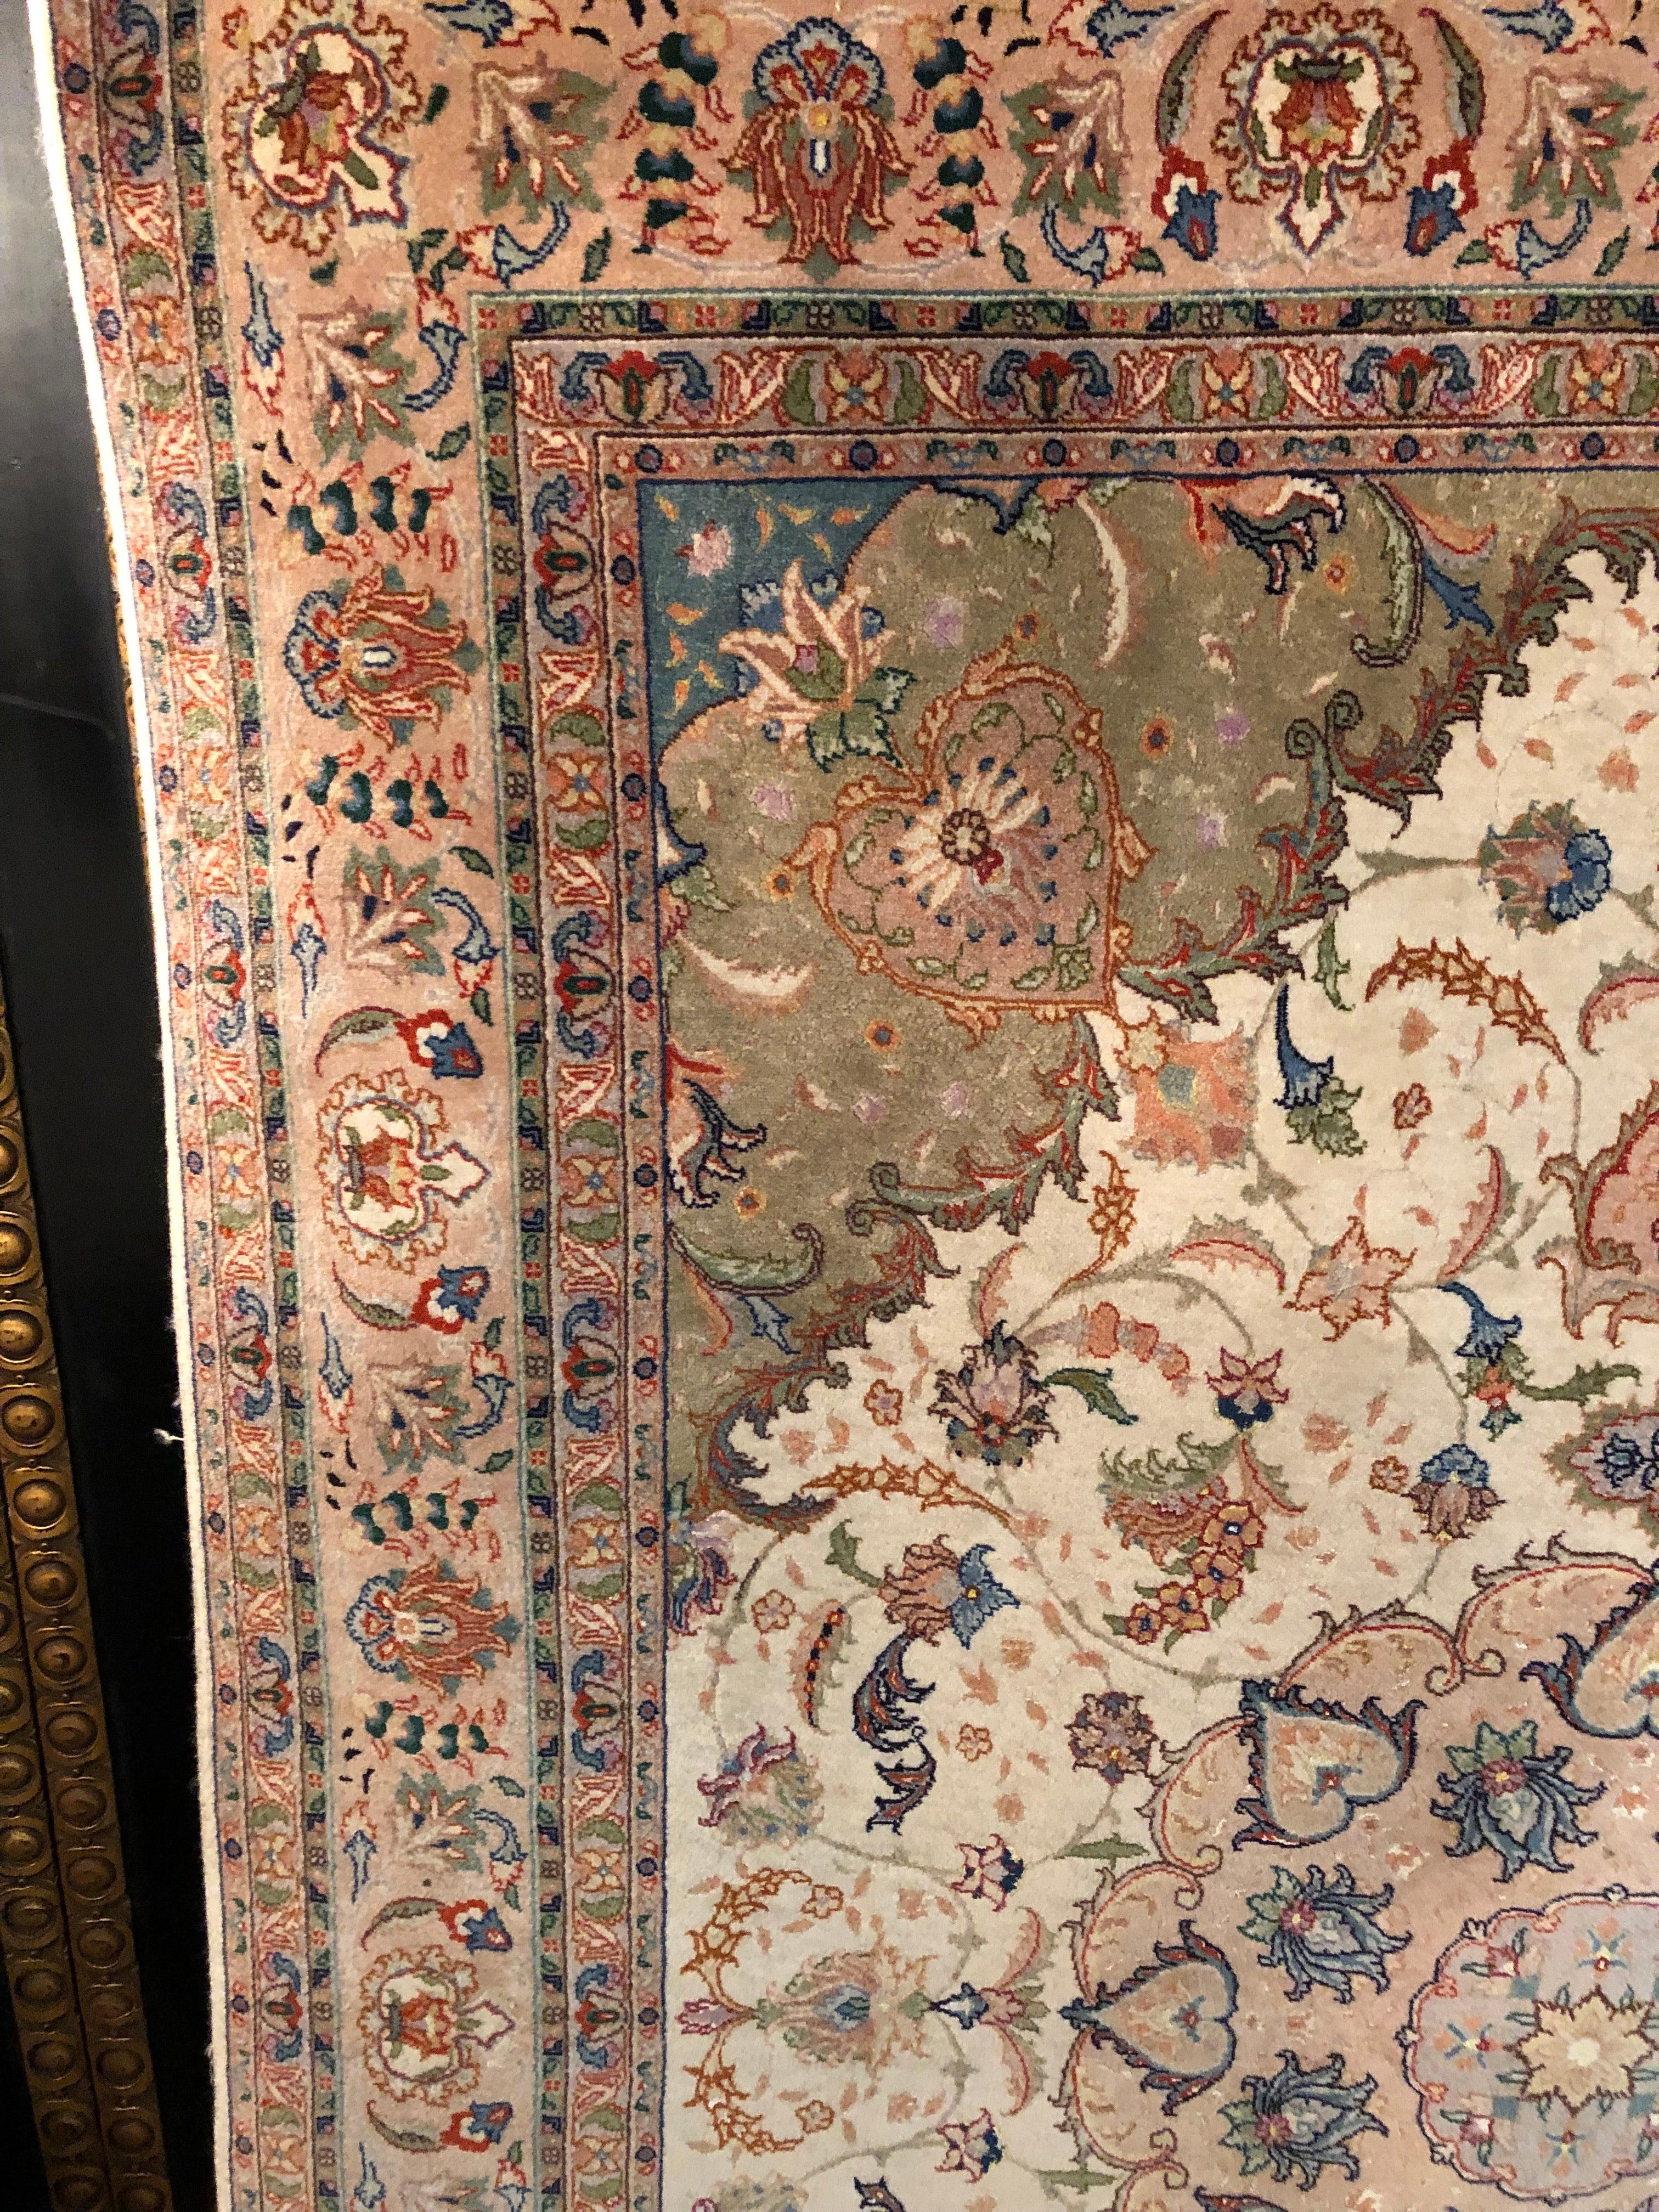 Hand knotted cork wool with silk oriental rug, these rugs are made in the renowned knotting areas.

These pieces are works of art of the highest quality worked in materials and crafts.

Please look at the carpet with patience and attention. Each